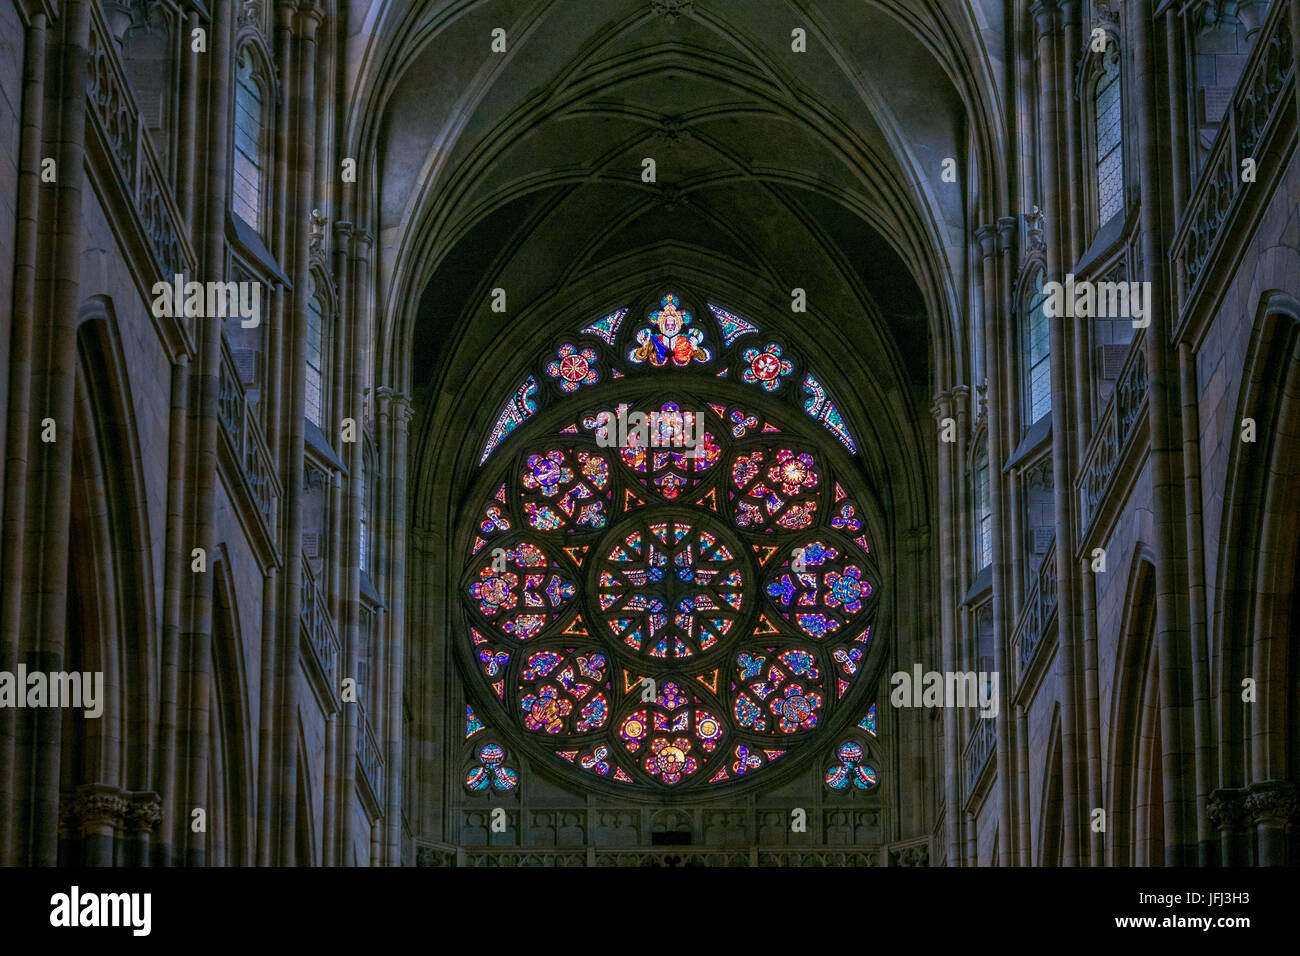 Glass window, apse of the Gothic St. Veits cathedral, Prague castle, Hradschin, castle district, Prague, Bohemian, Czechia, Europe Stock Photo